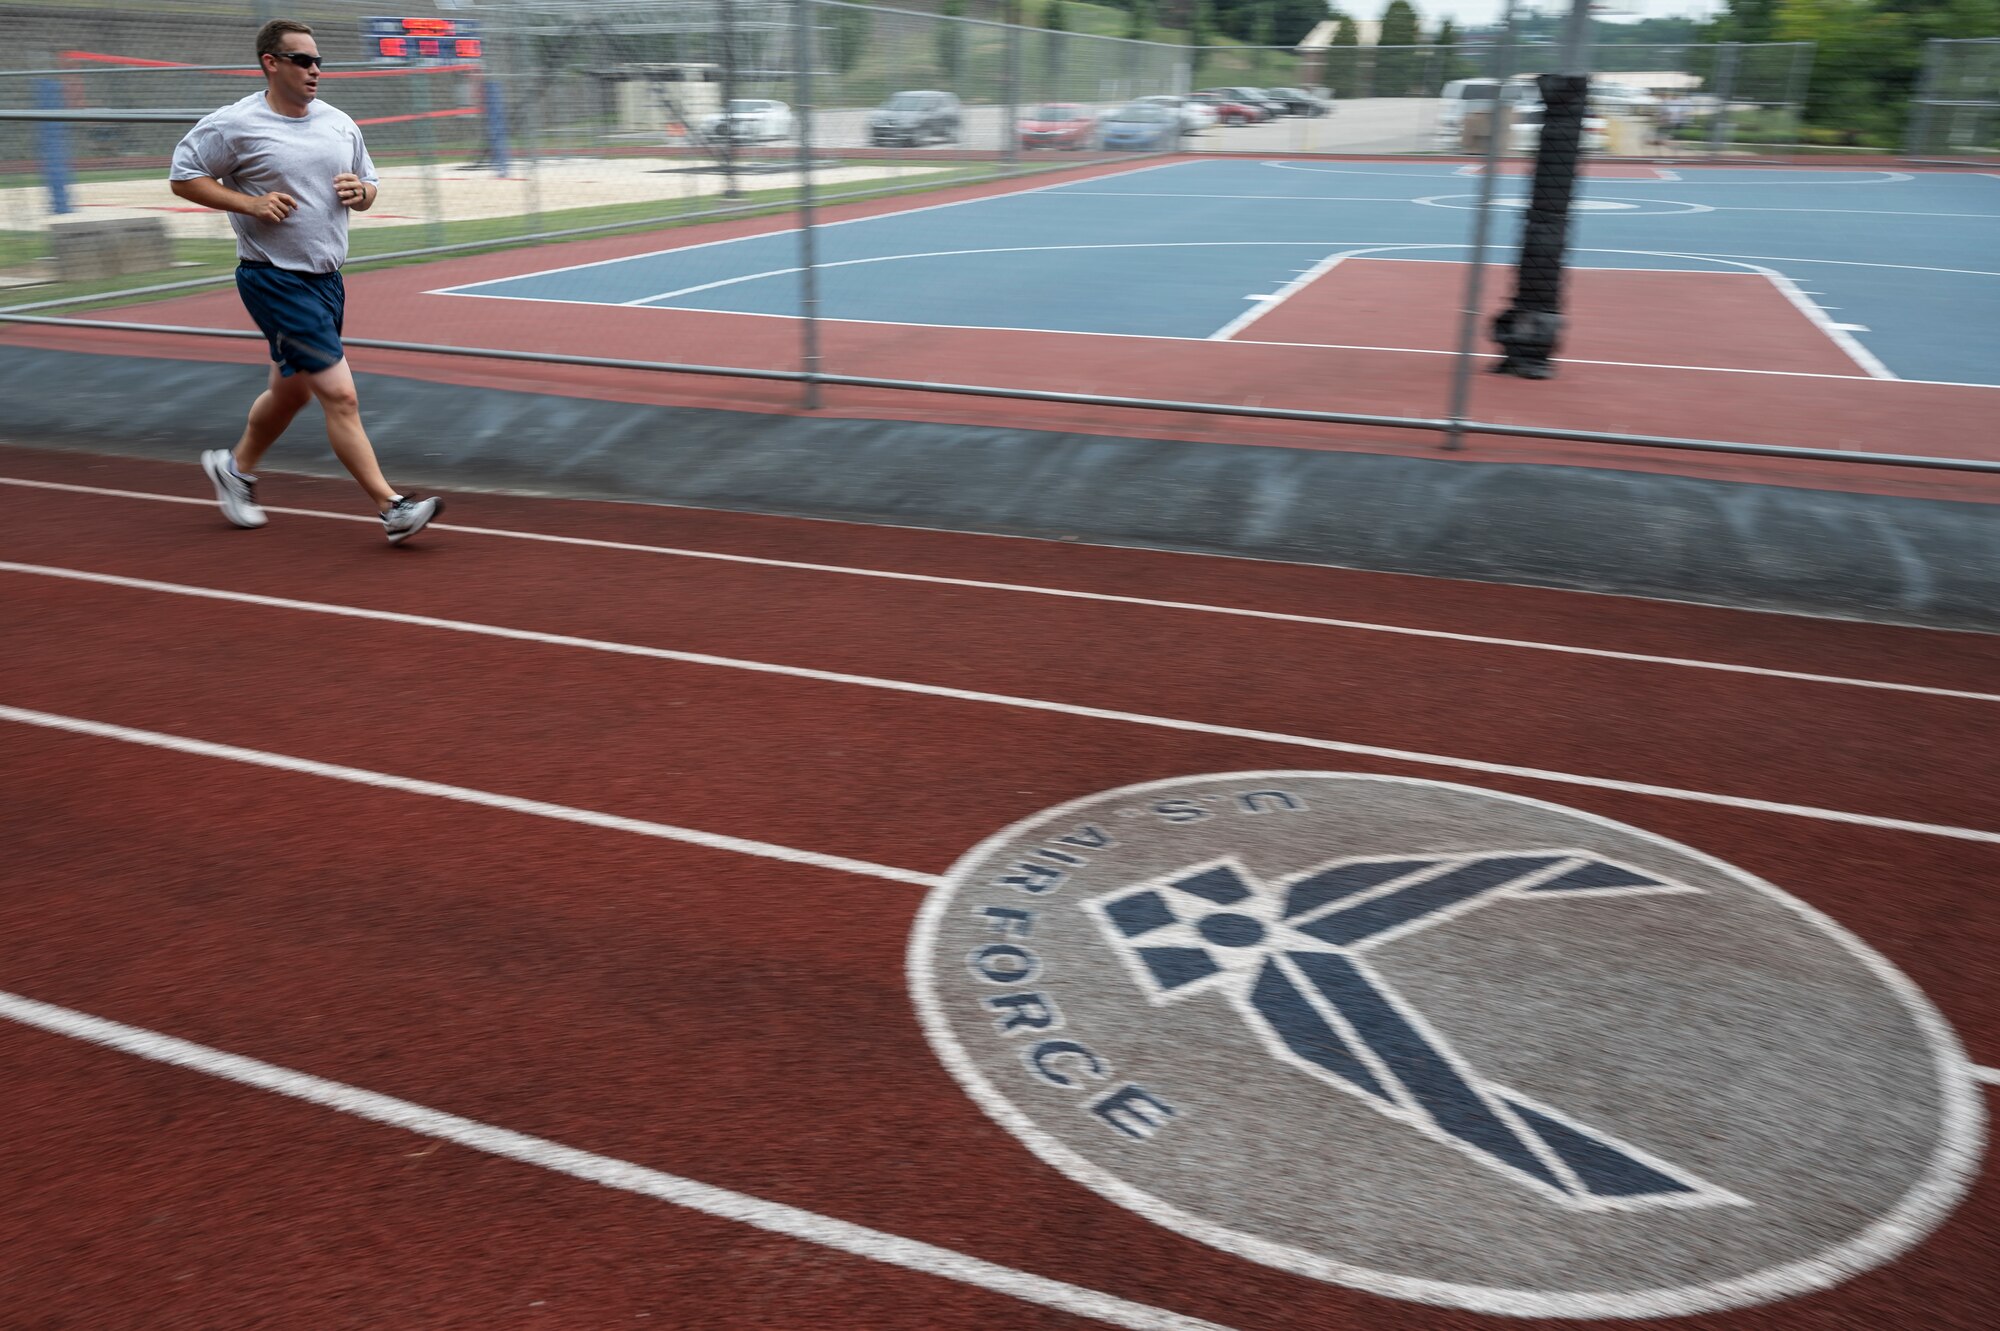 Master Sgt. Joseph Bridge, 911th Airlift Wing finance technician, runs on the track during a physical fitness test at the Pittsburgh International Airport Air Reserve Station, Pennsylvania, July 29, 2021. The U.S. Air Force started conducting physical fitness tests with some changes to the standards after a brief hiatus due to COVID-19.